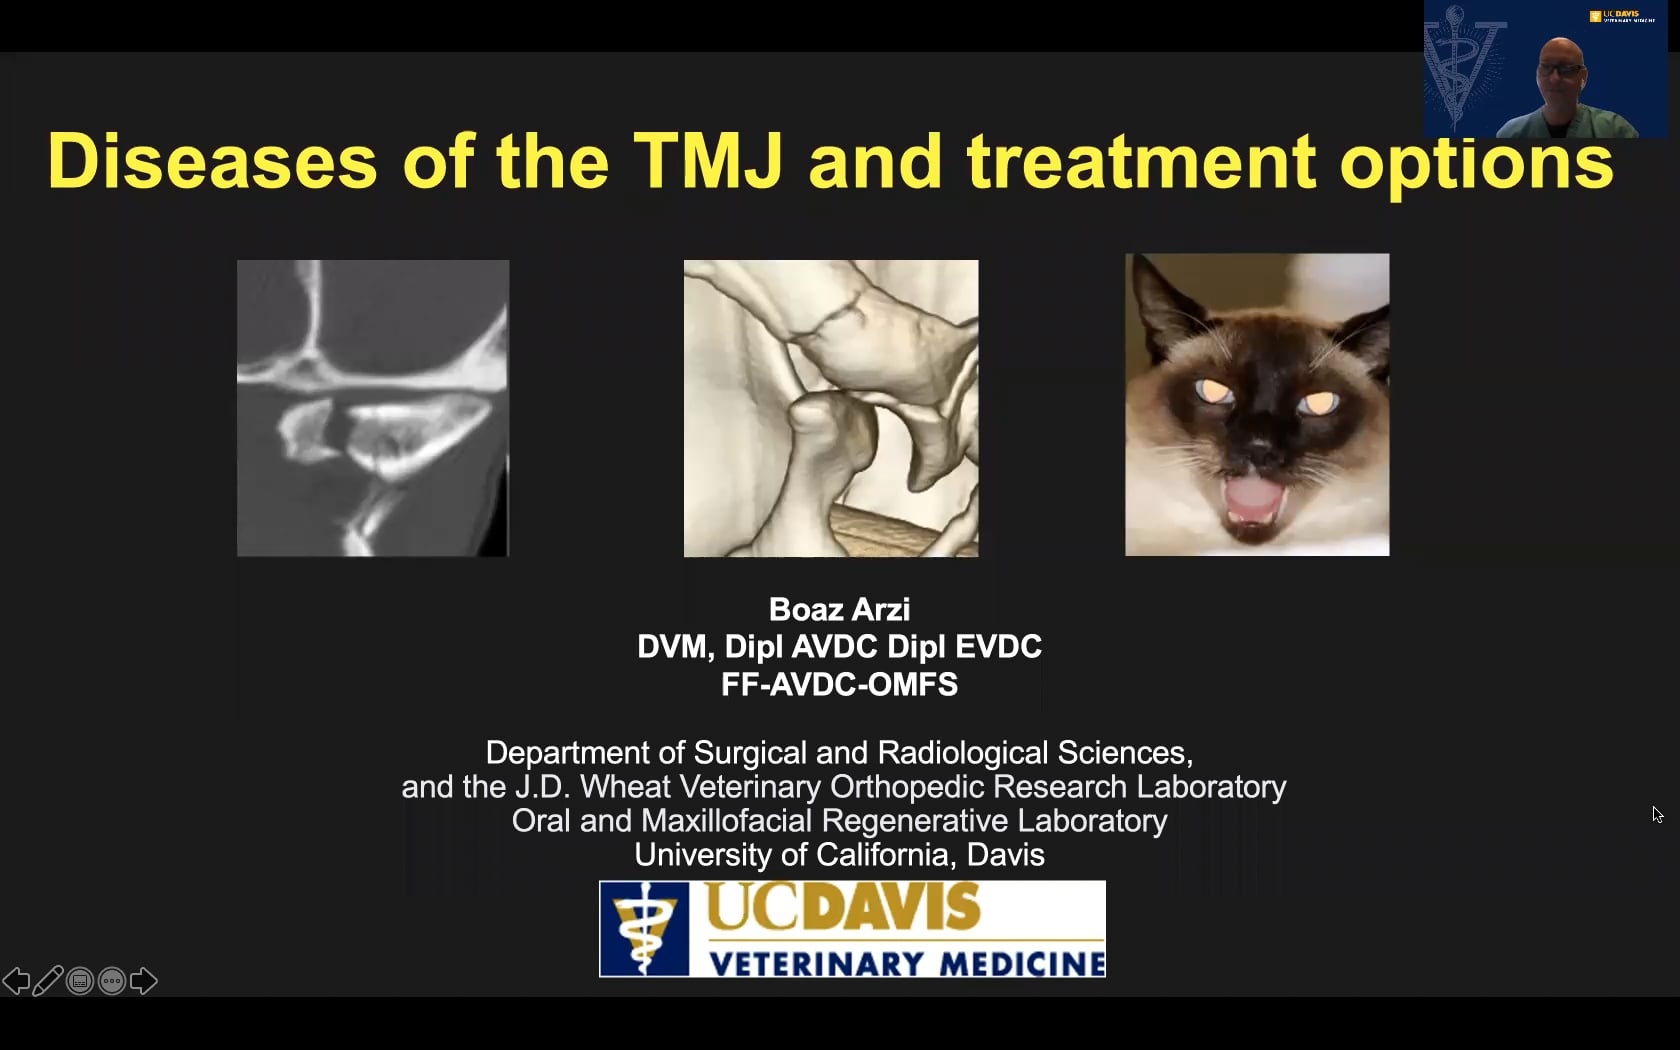 Diseases of the TMJ and treatment options